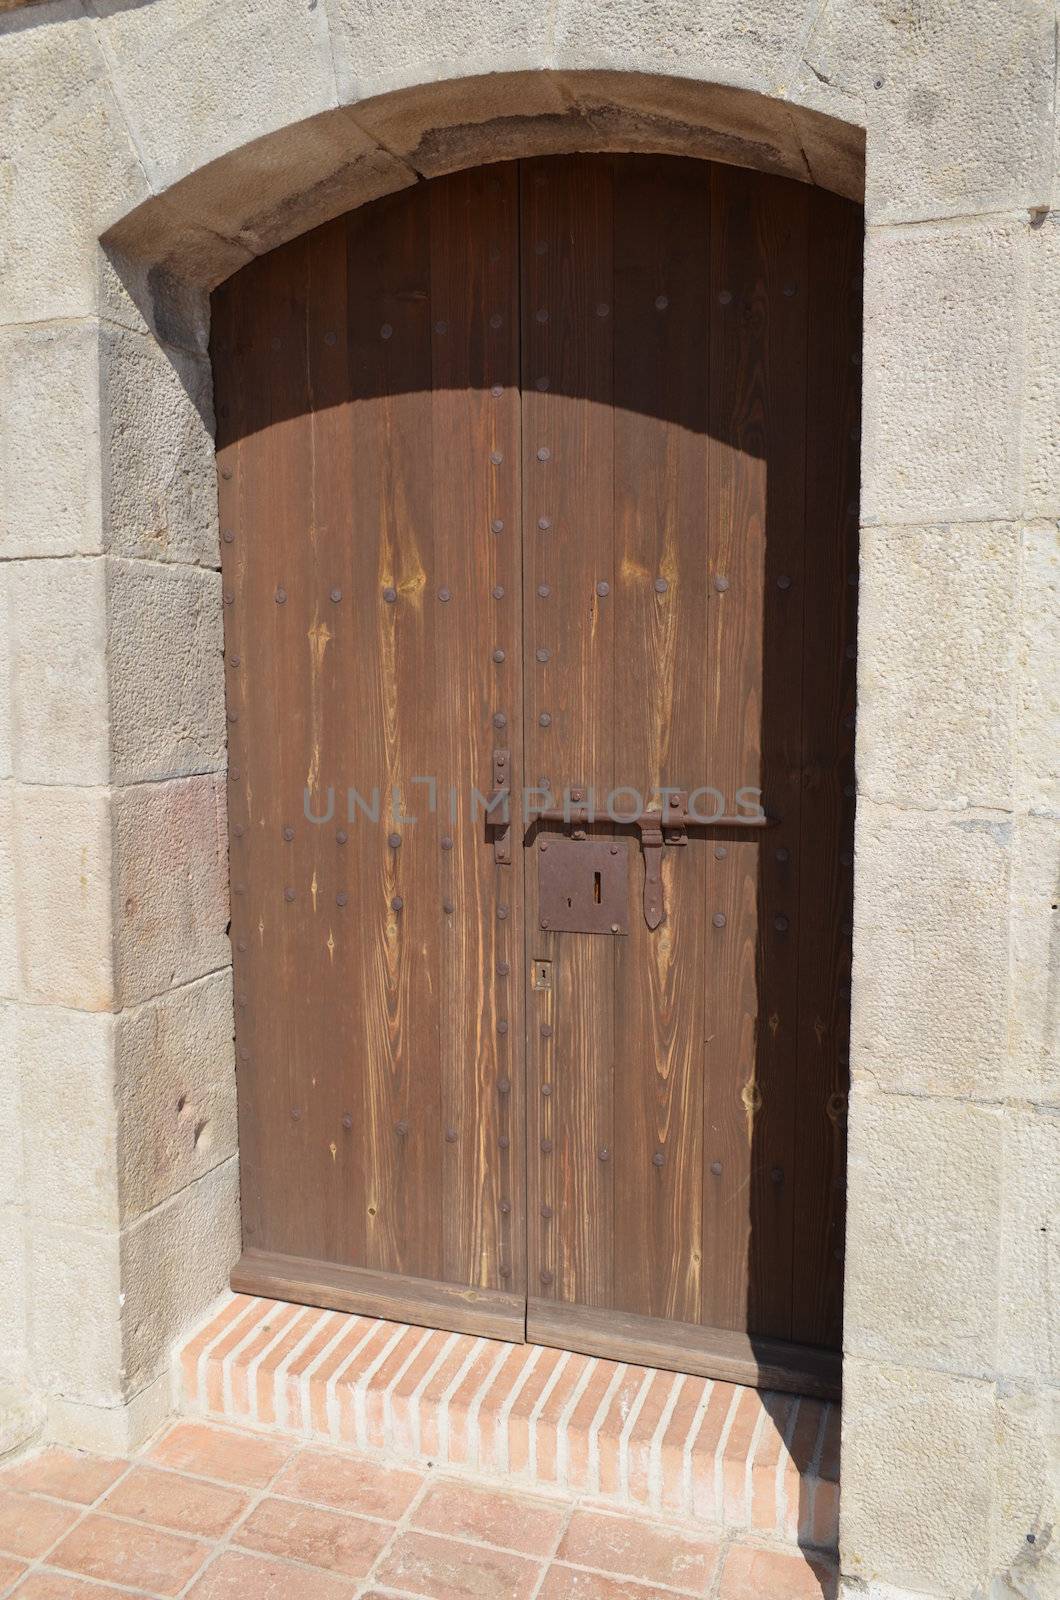 Wooden door and stone surround on a Spanish fortress in Barcelona,Spain.